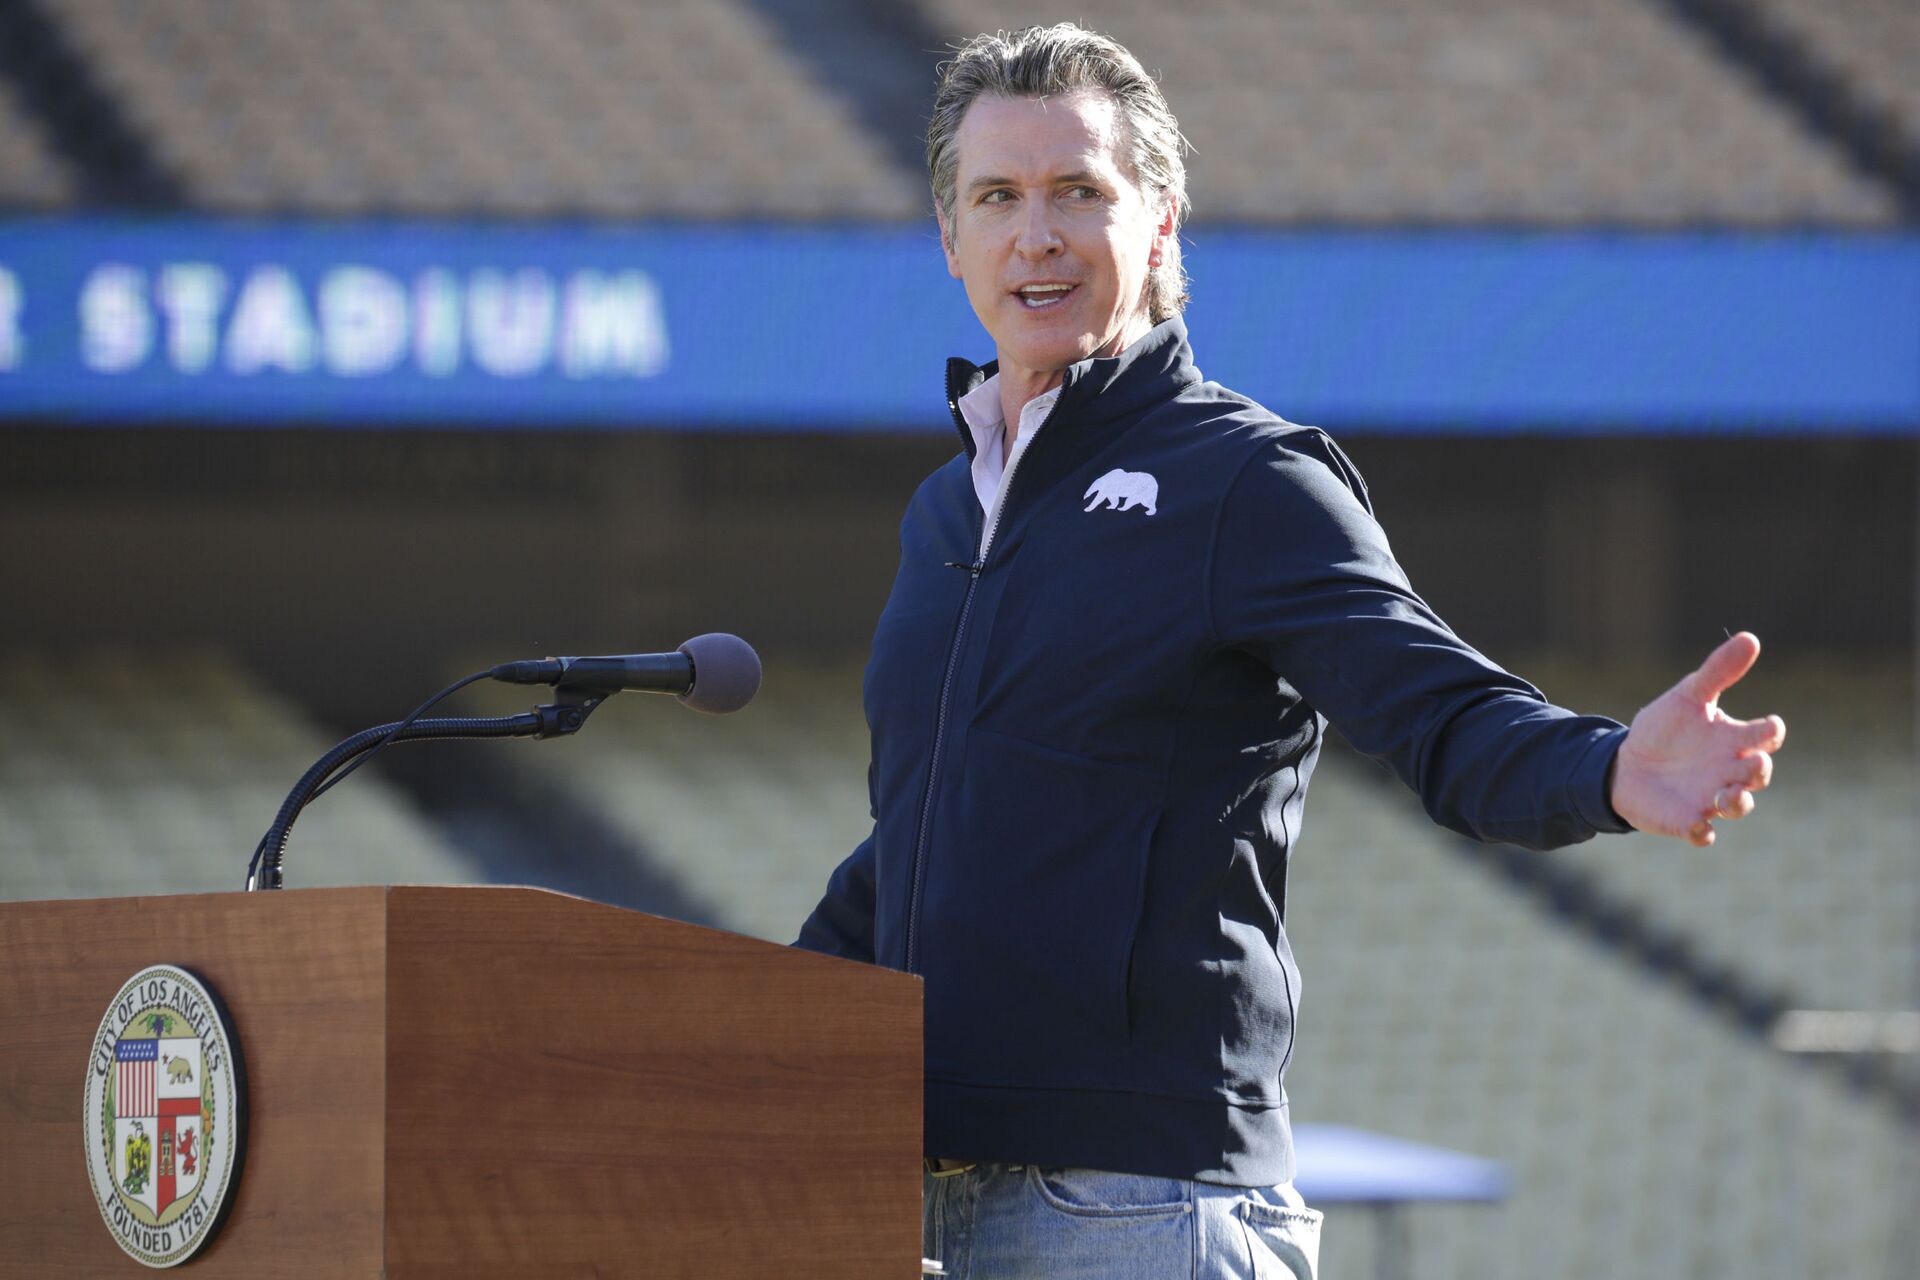 What is the 'Recall Gavin Newsom' Campaign and How Can It Challenge California's Governor? - Sputnik International, 1920, 16.02.2021